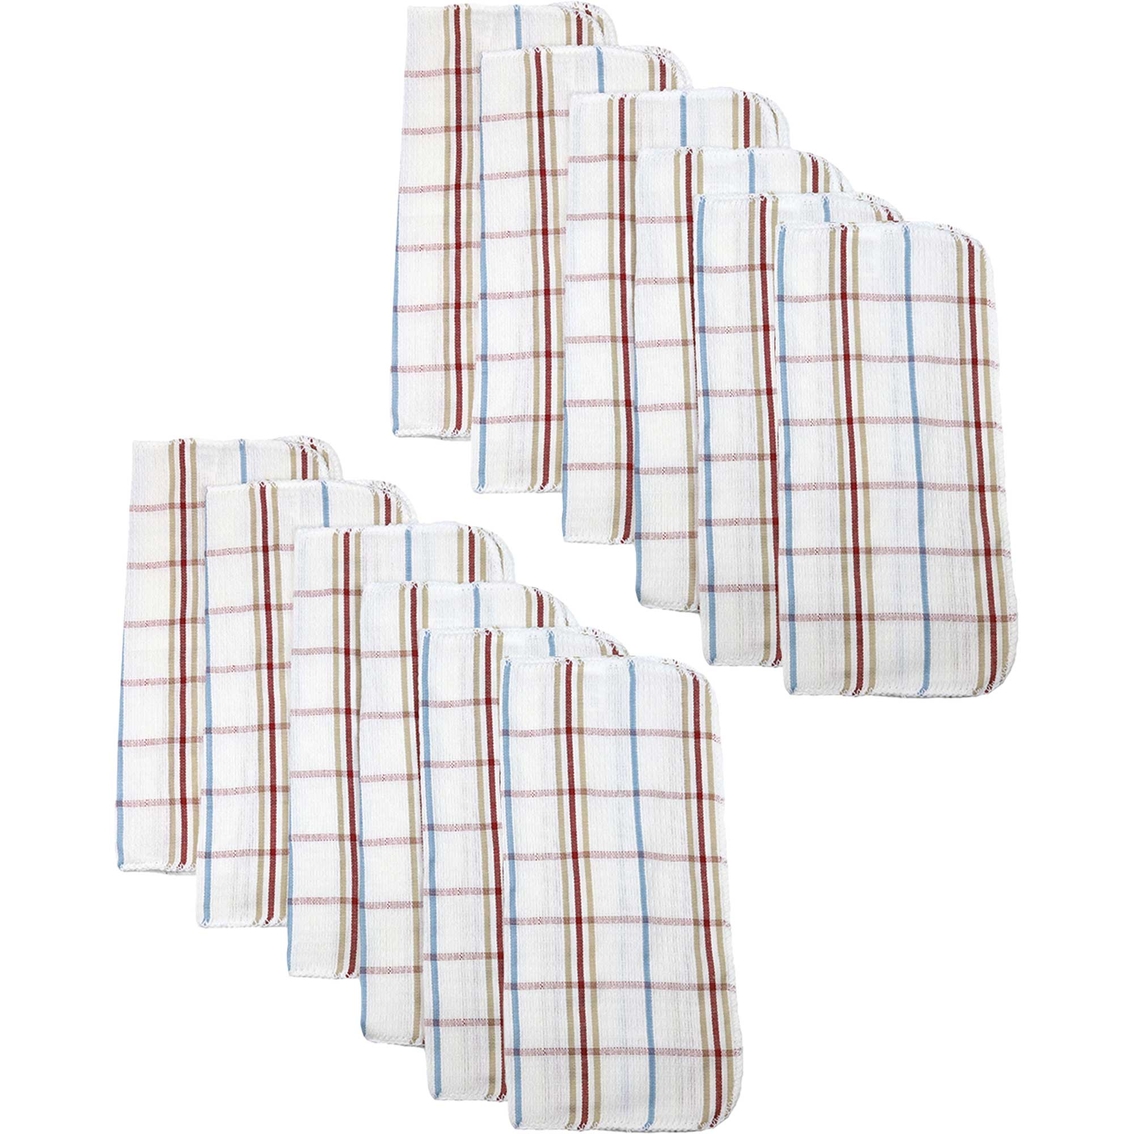 1888 Mills Classic Essentials Waffle Weave Dish Cloth 12 pk. - Image 2 of 4